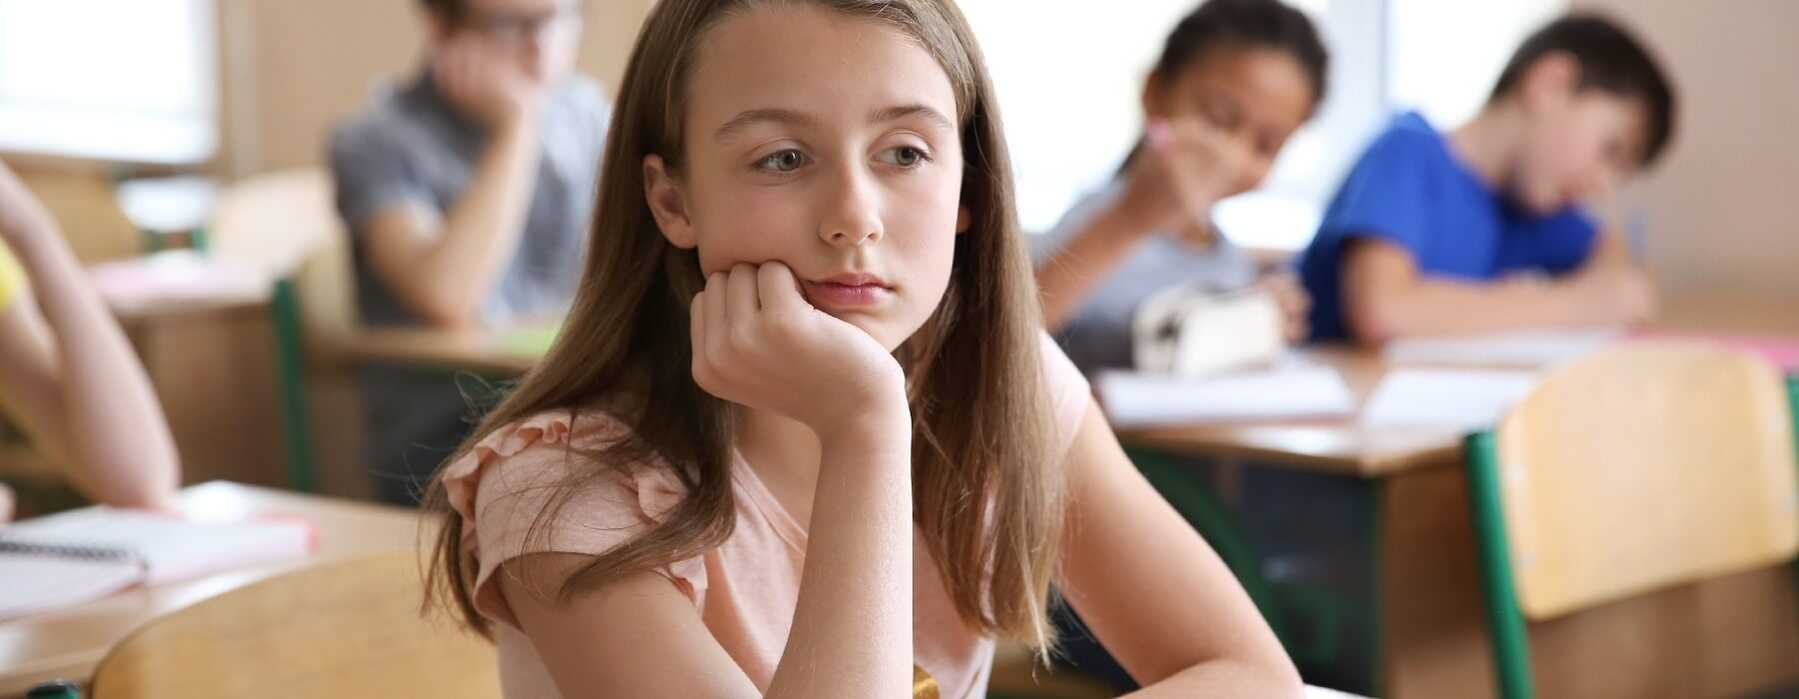 Girl looking uncertain while sitting at school desk